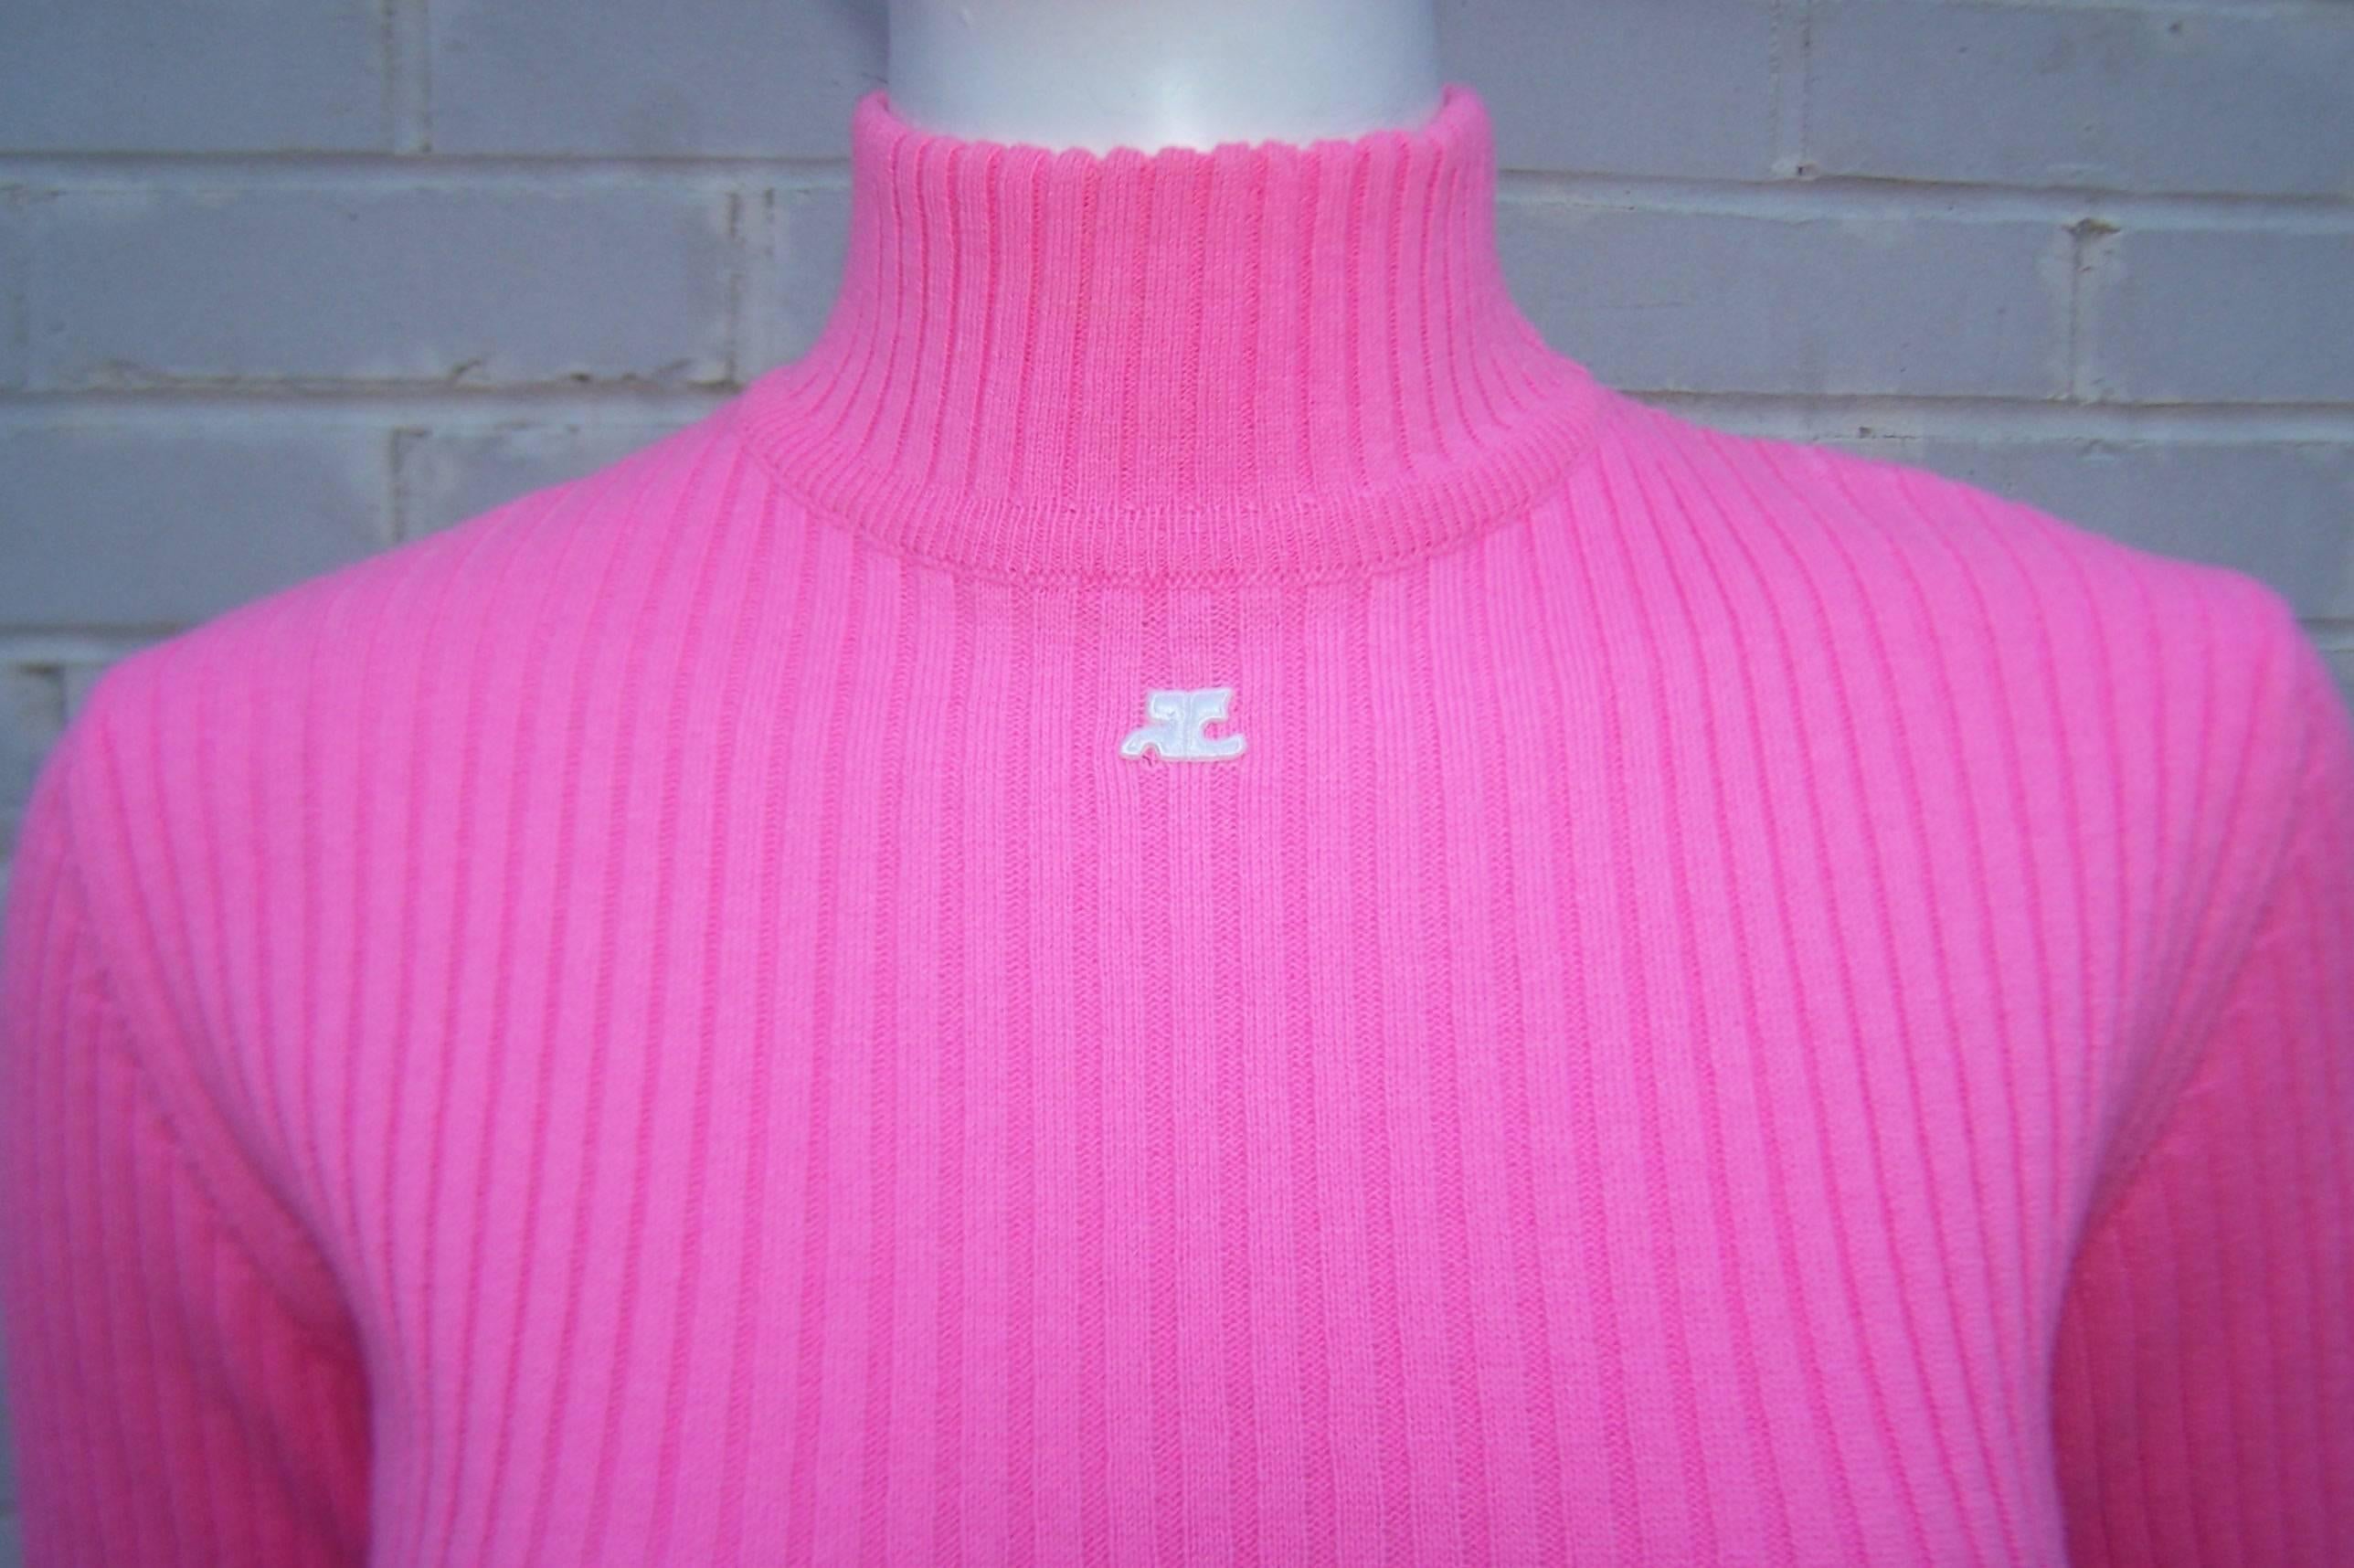 This current Courreges mock turtleneck sweater has a mod 1960's vibe with a vibrant color pop.  The wool blend is perfect for warm weather seasons and the ribbed design is both relaxed and body conscious.  The hot pink color and mod white Courreges